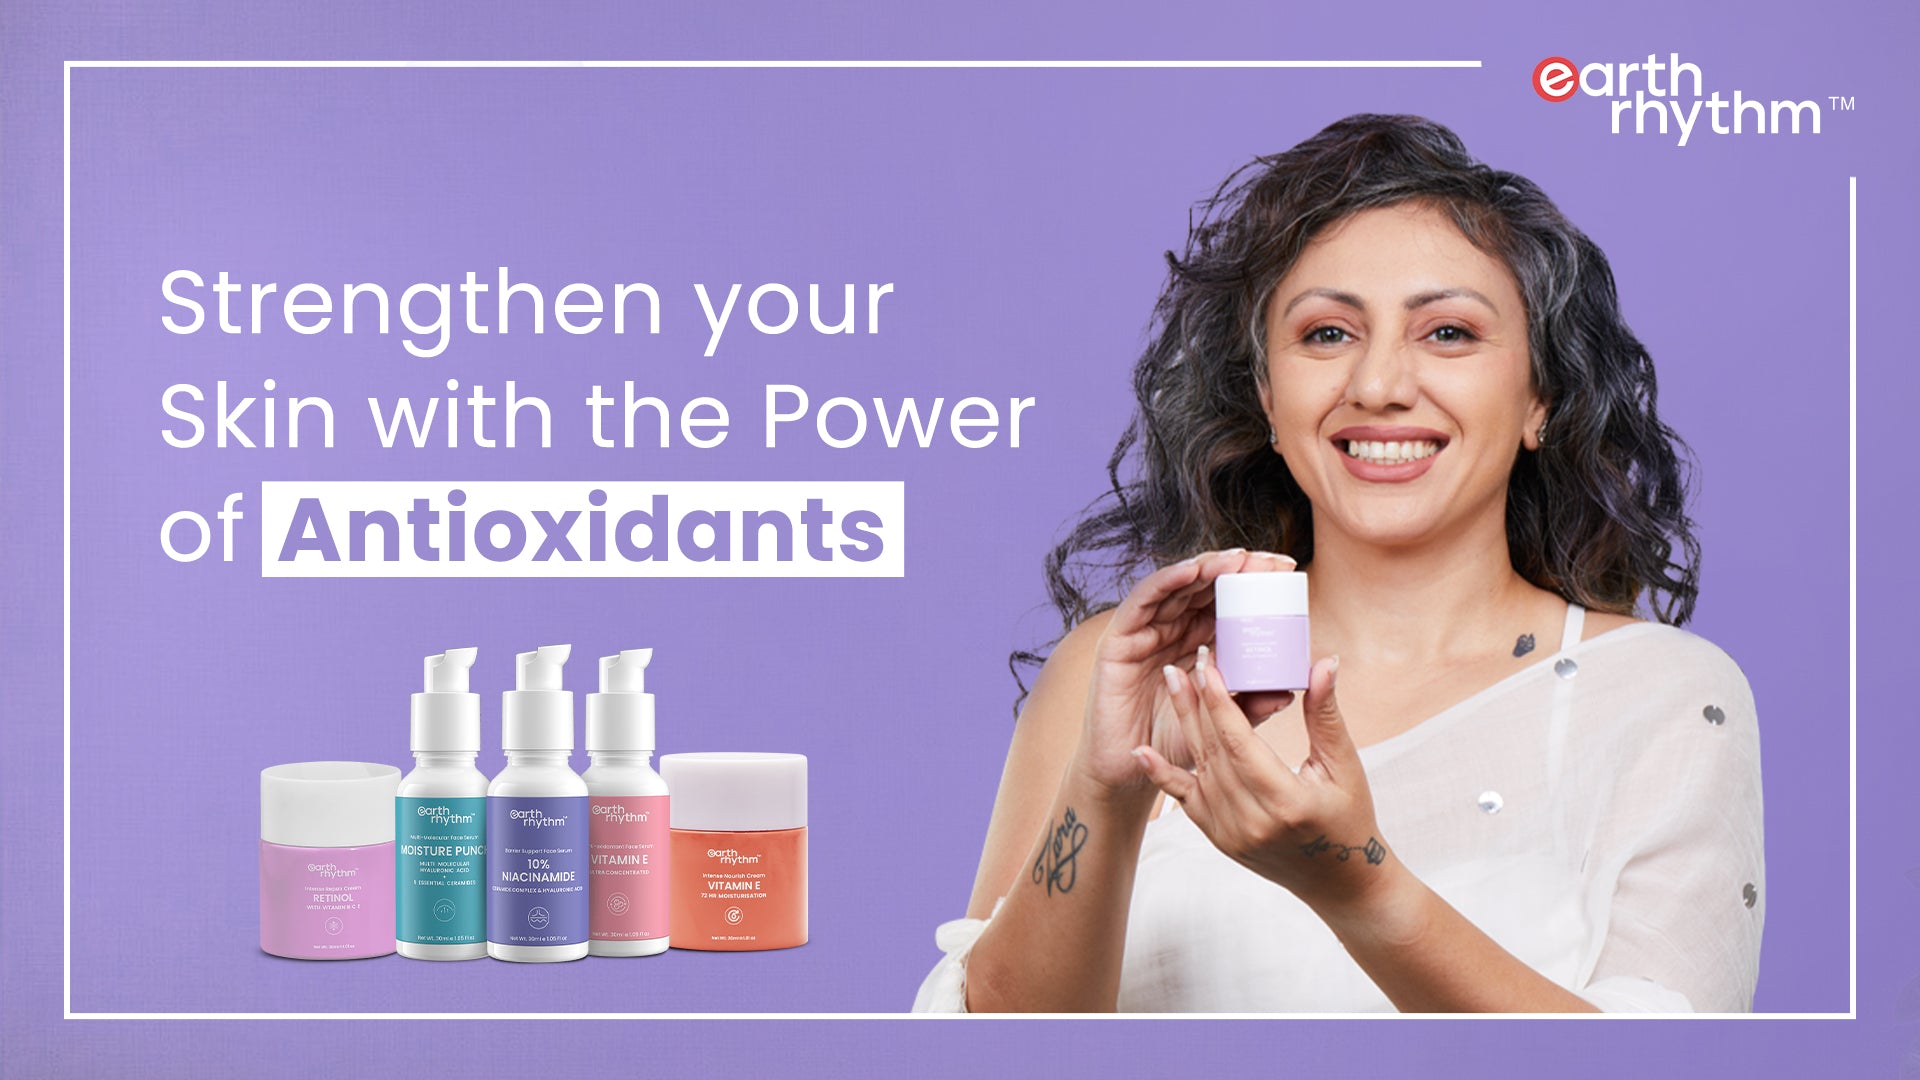 Strengthen your Skin with the Power of Antioxidants